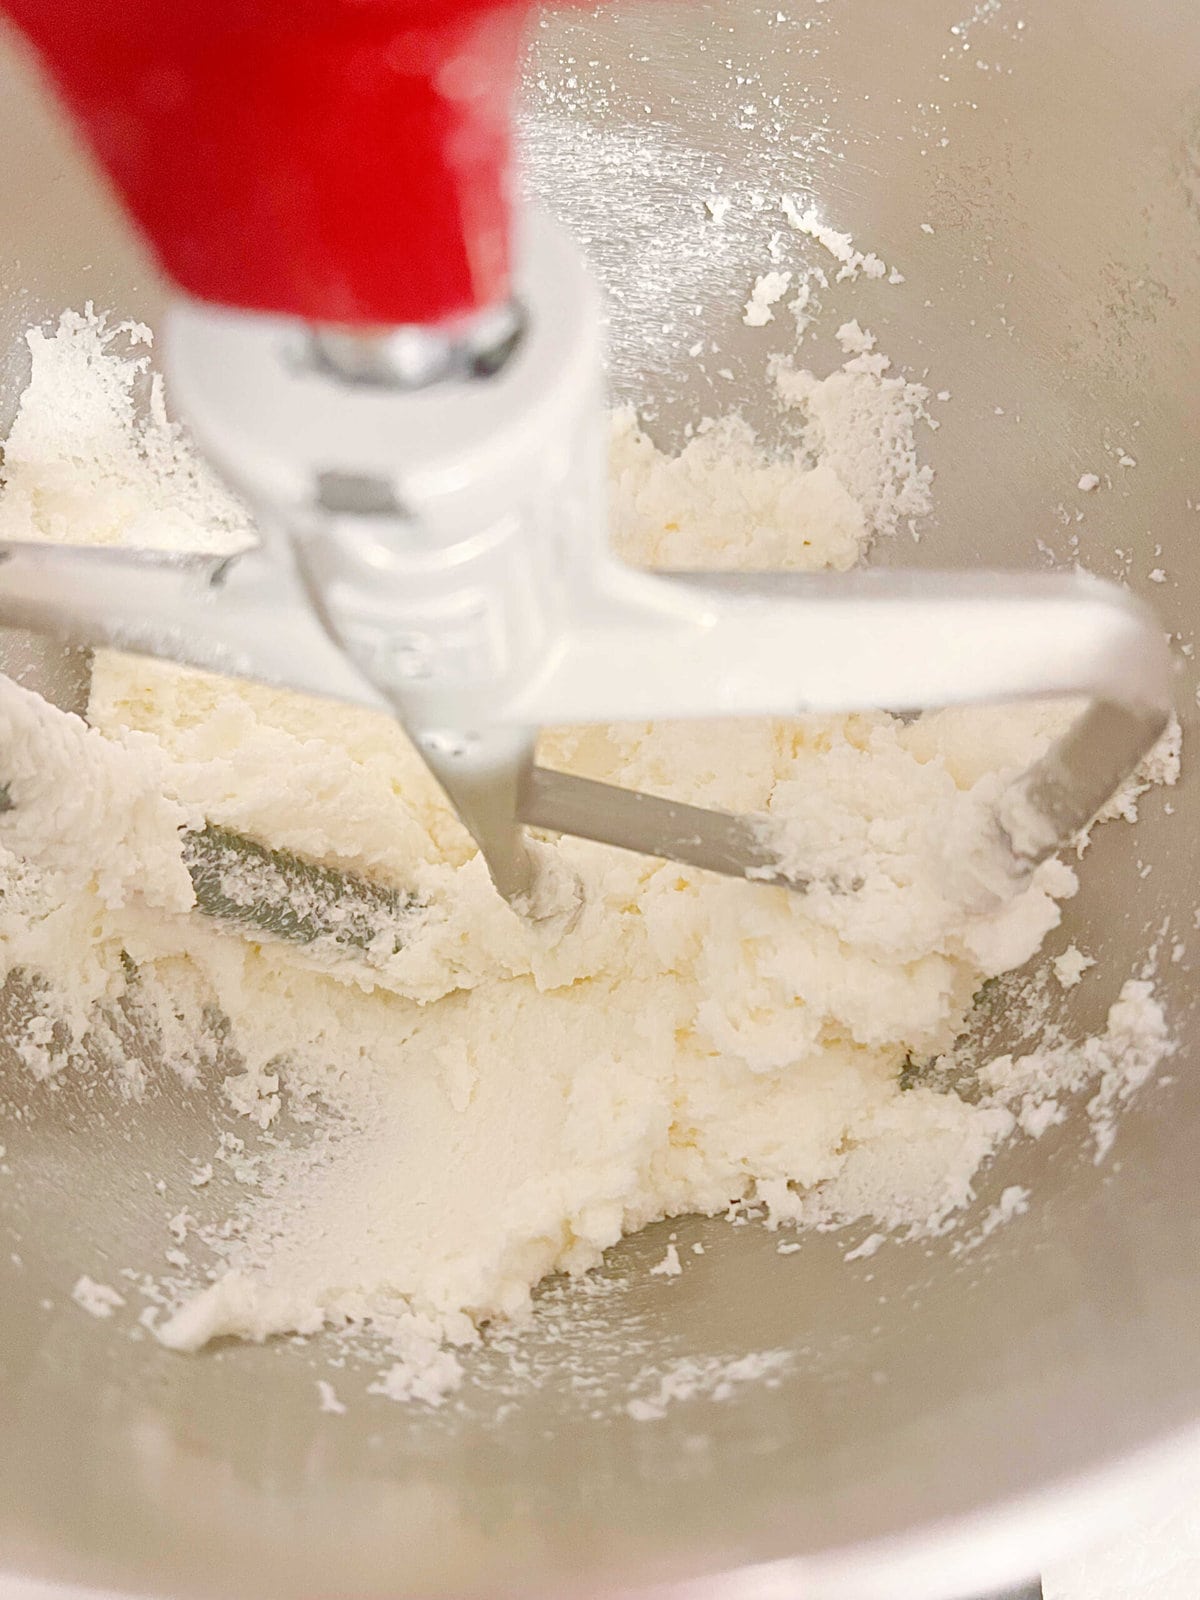 Butter and sugar mixture in mixing bowl.